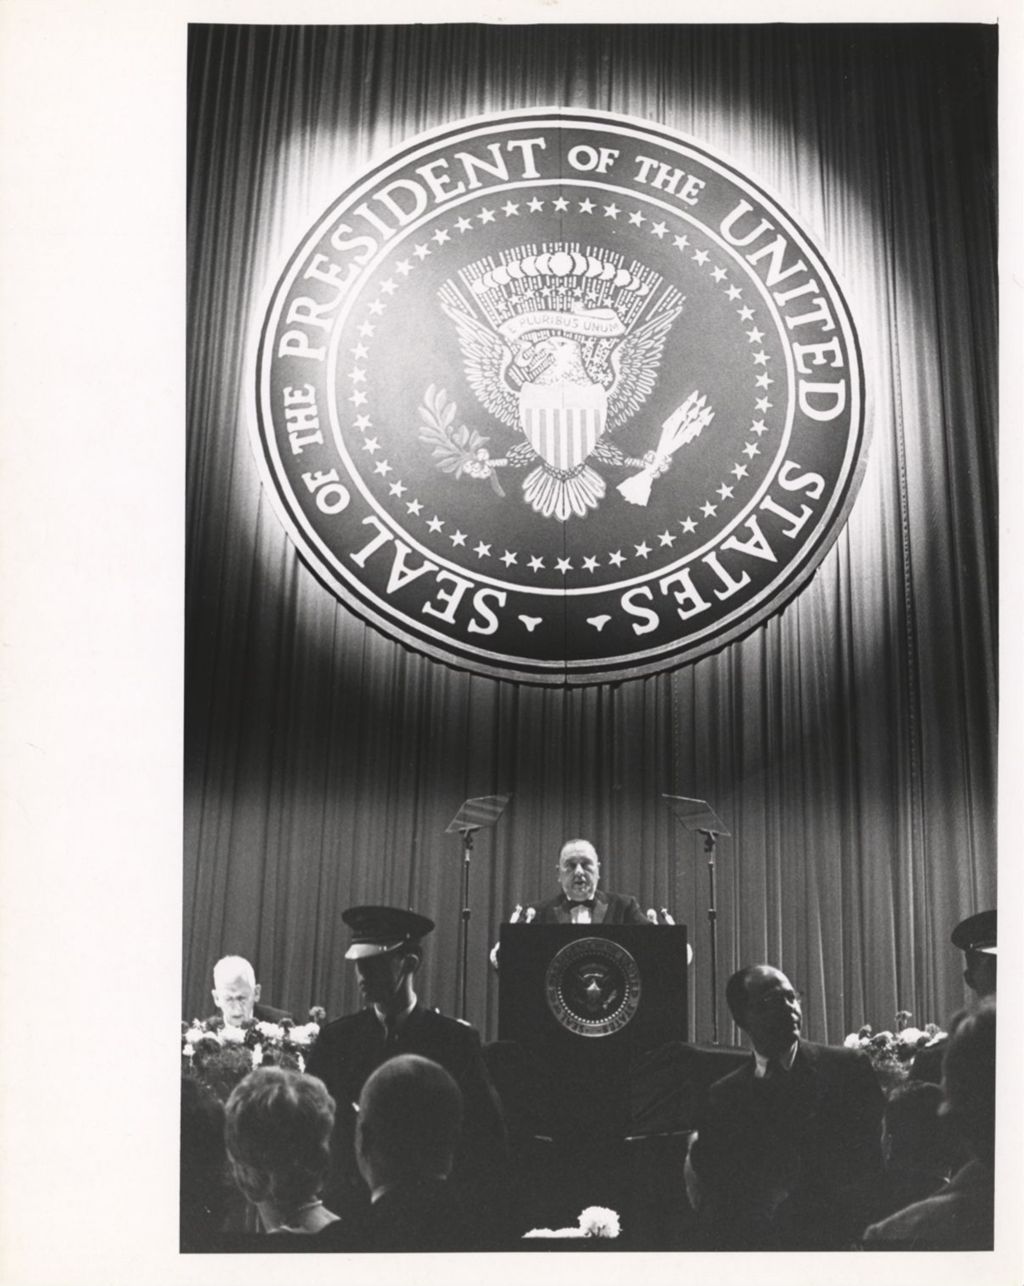 Richard J. Daley speaking at Presidential event